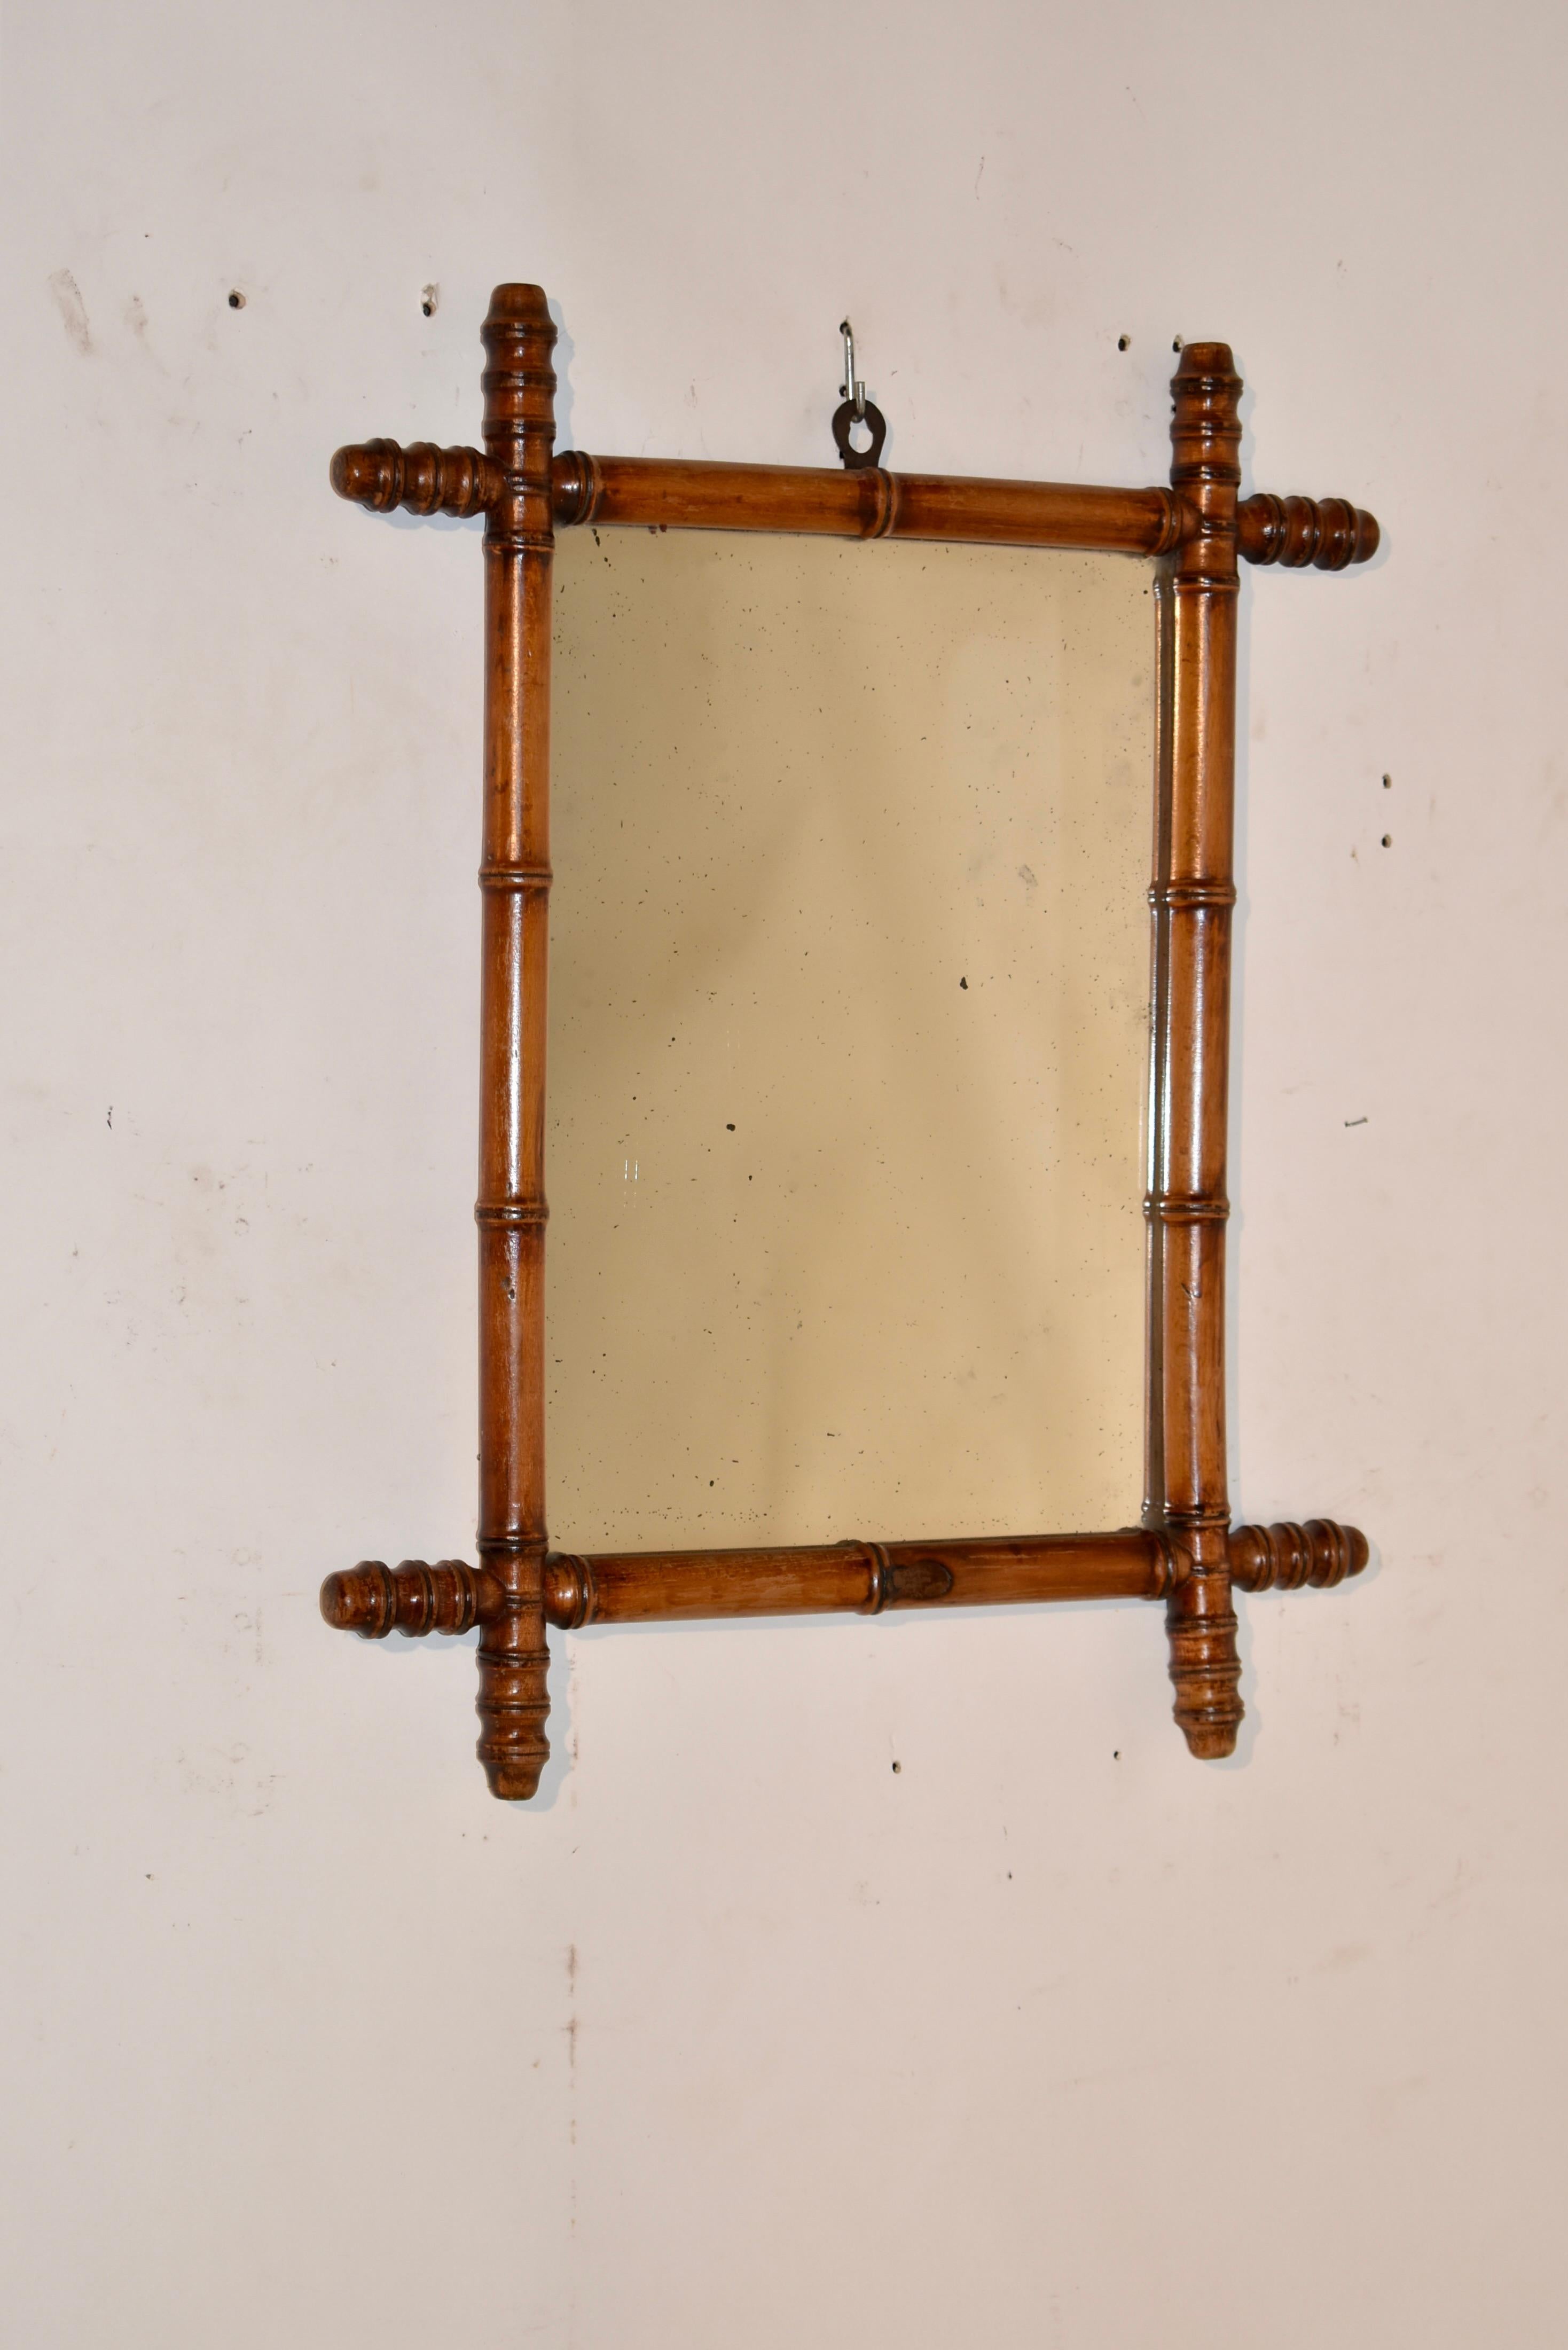 Late 19th century faux bamboo mirror made from cherry in France.  The frame is hand turned to have the appearance of bamboo, but is made from rich cherry and retains its original color and patina.  The corners of the frame intersect and surround a